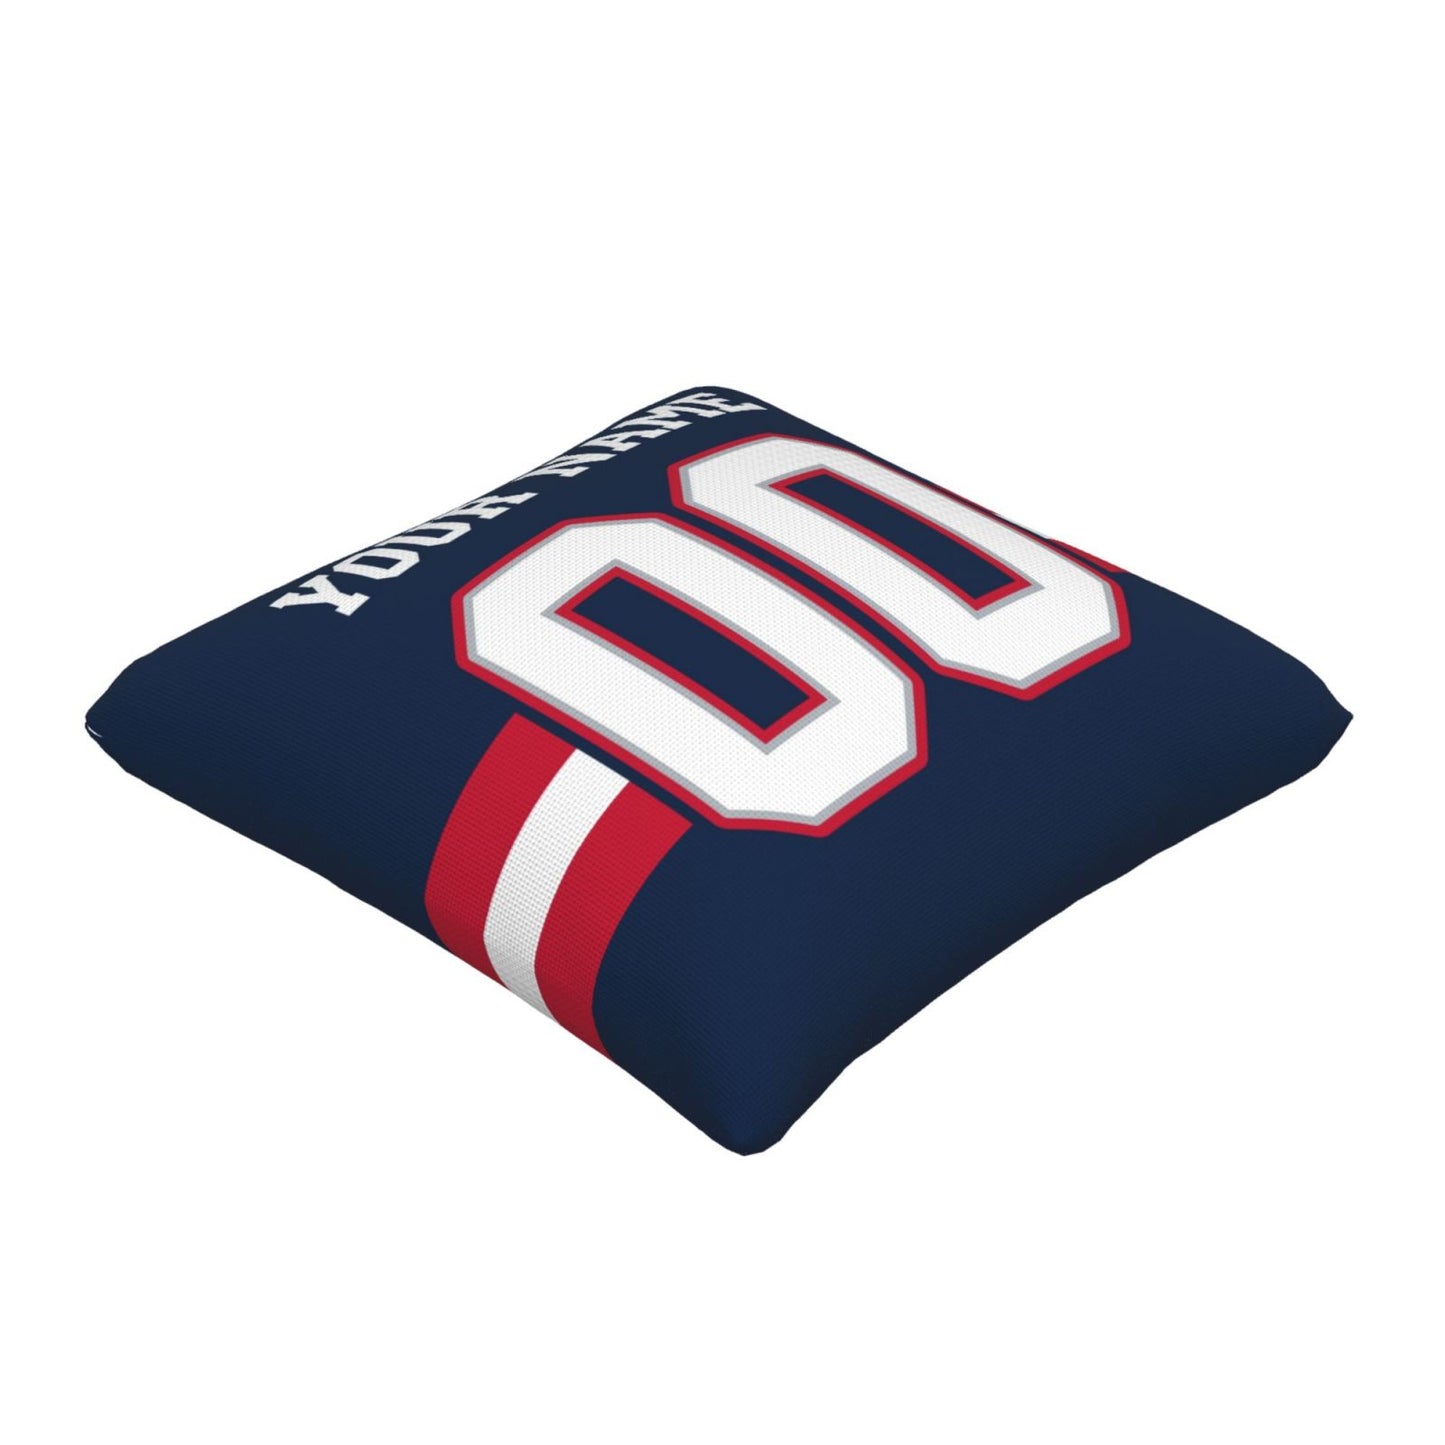 Customized New England Patriots Football Team Decorative Throw Pillow Case Print Personalized Football Style Fans Letters & Number Navy Pillowcase Birthday Gift